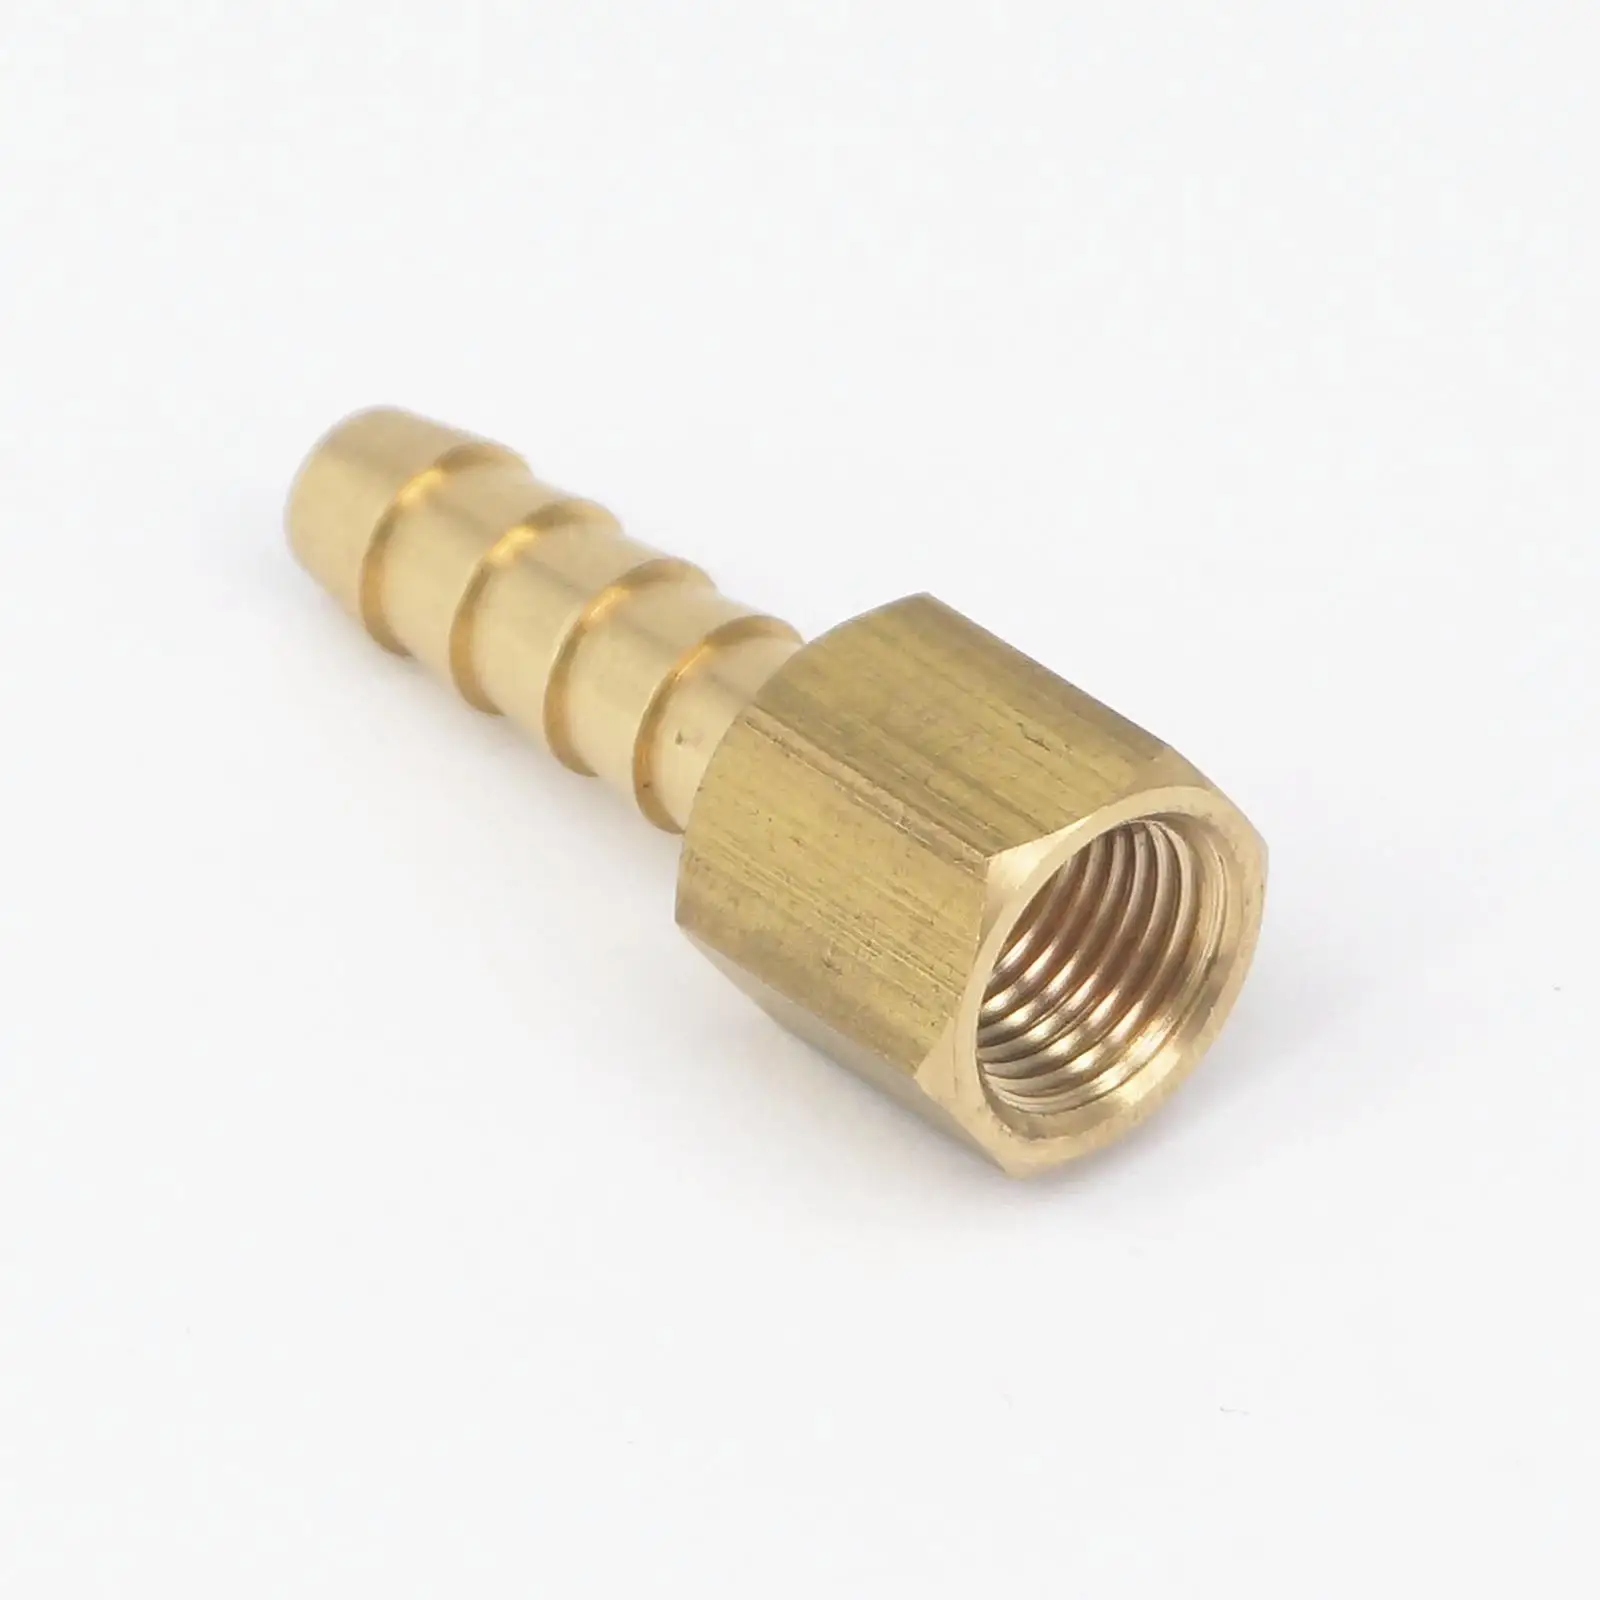 6mm Well Made Brass Hose Barb Fitting Female Fuel Air Gas Oil 1/4" BSP